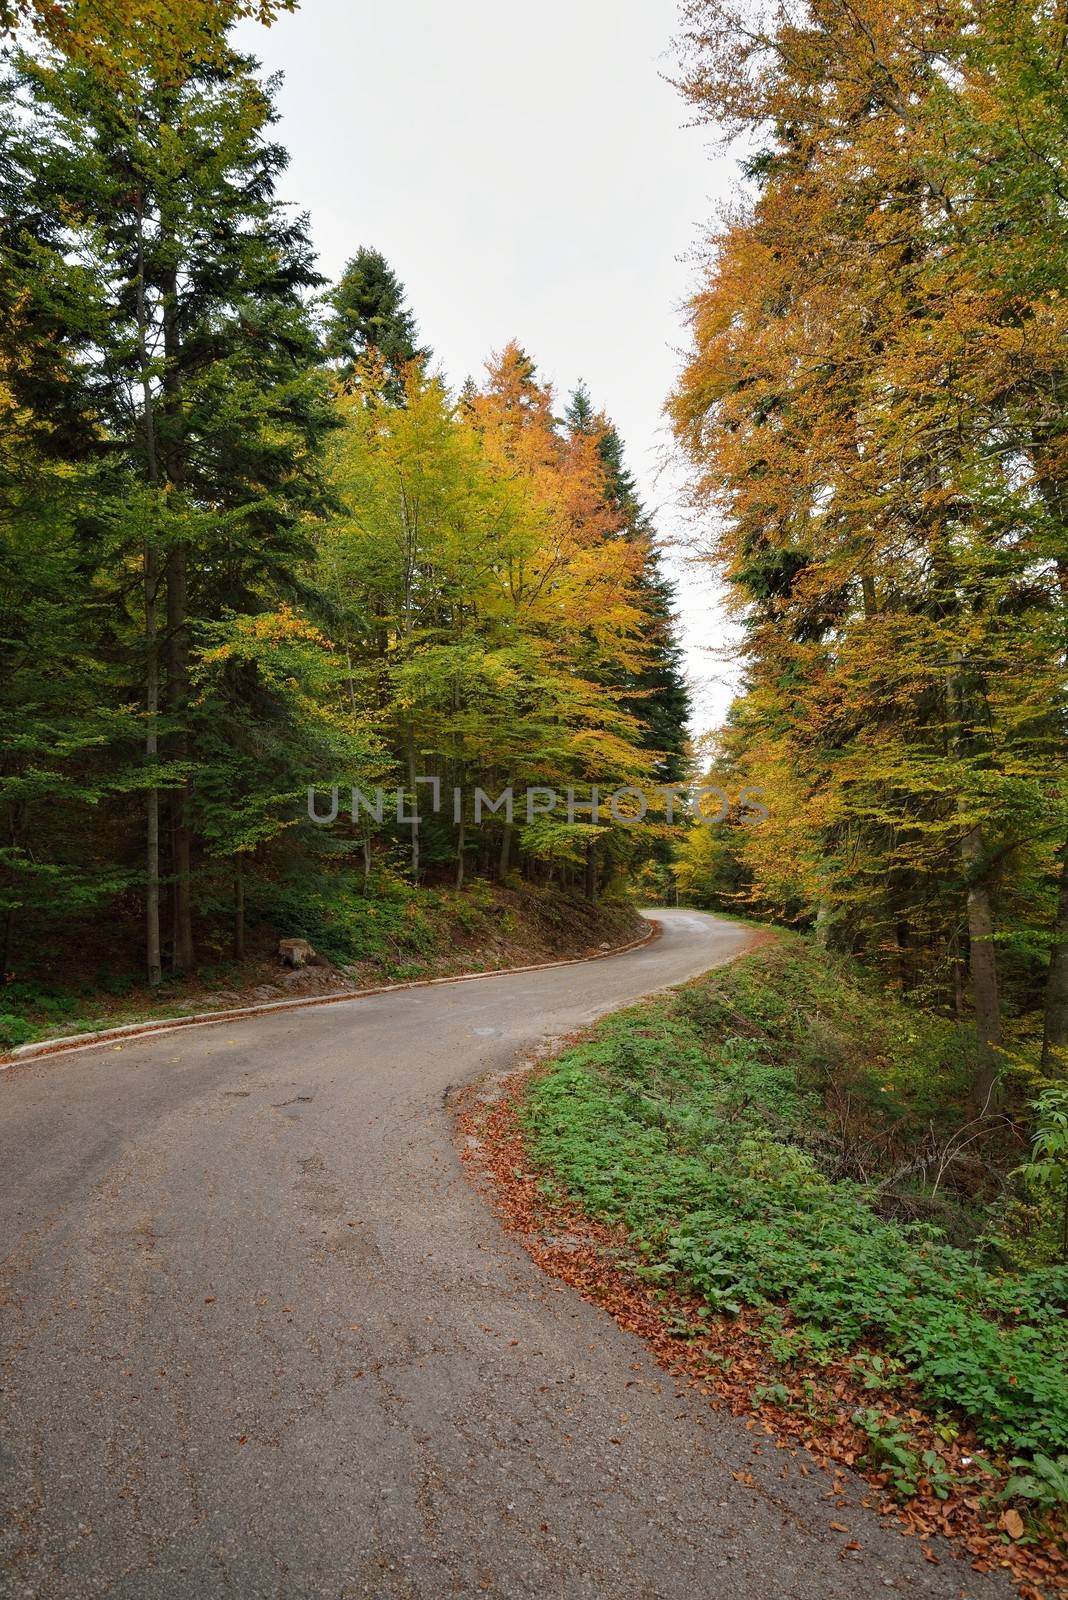 Autumn Forest with Colorful Leaves on Trees and Curved Road